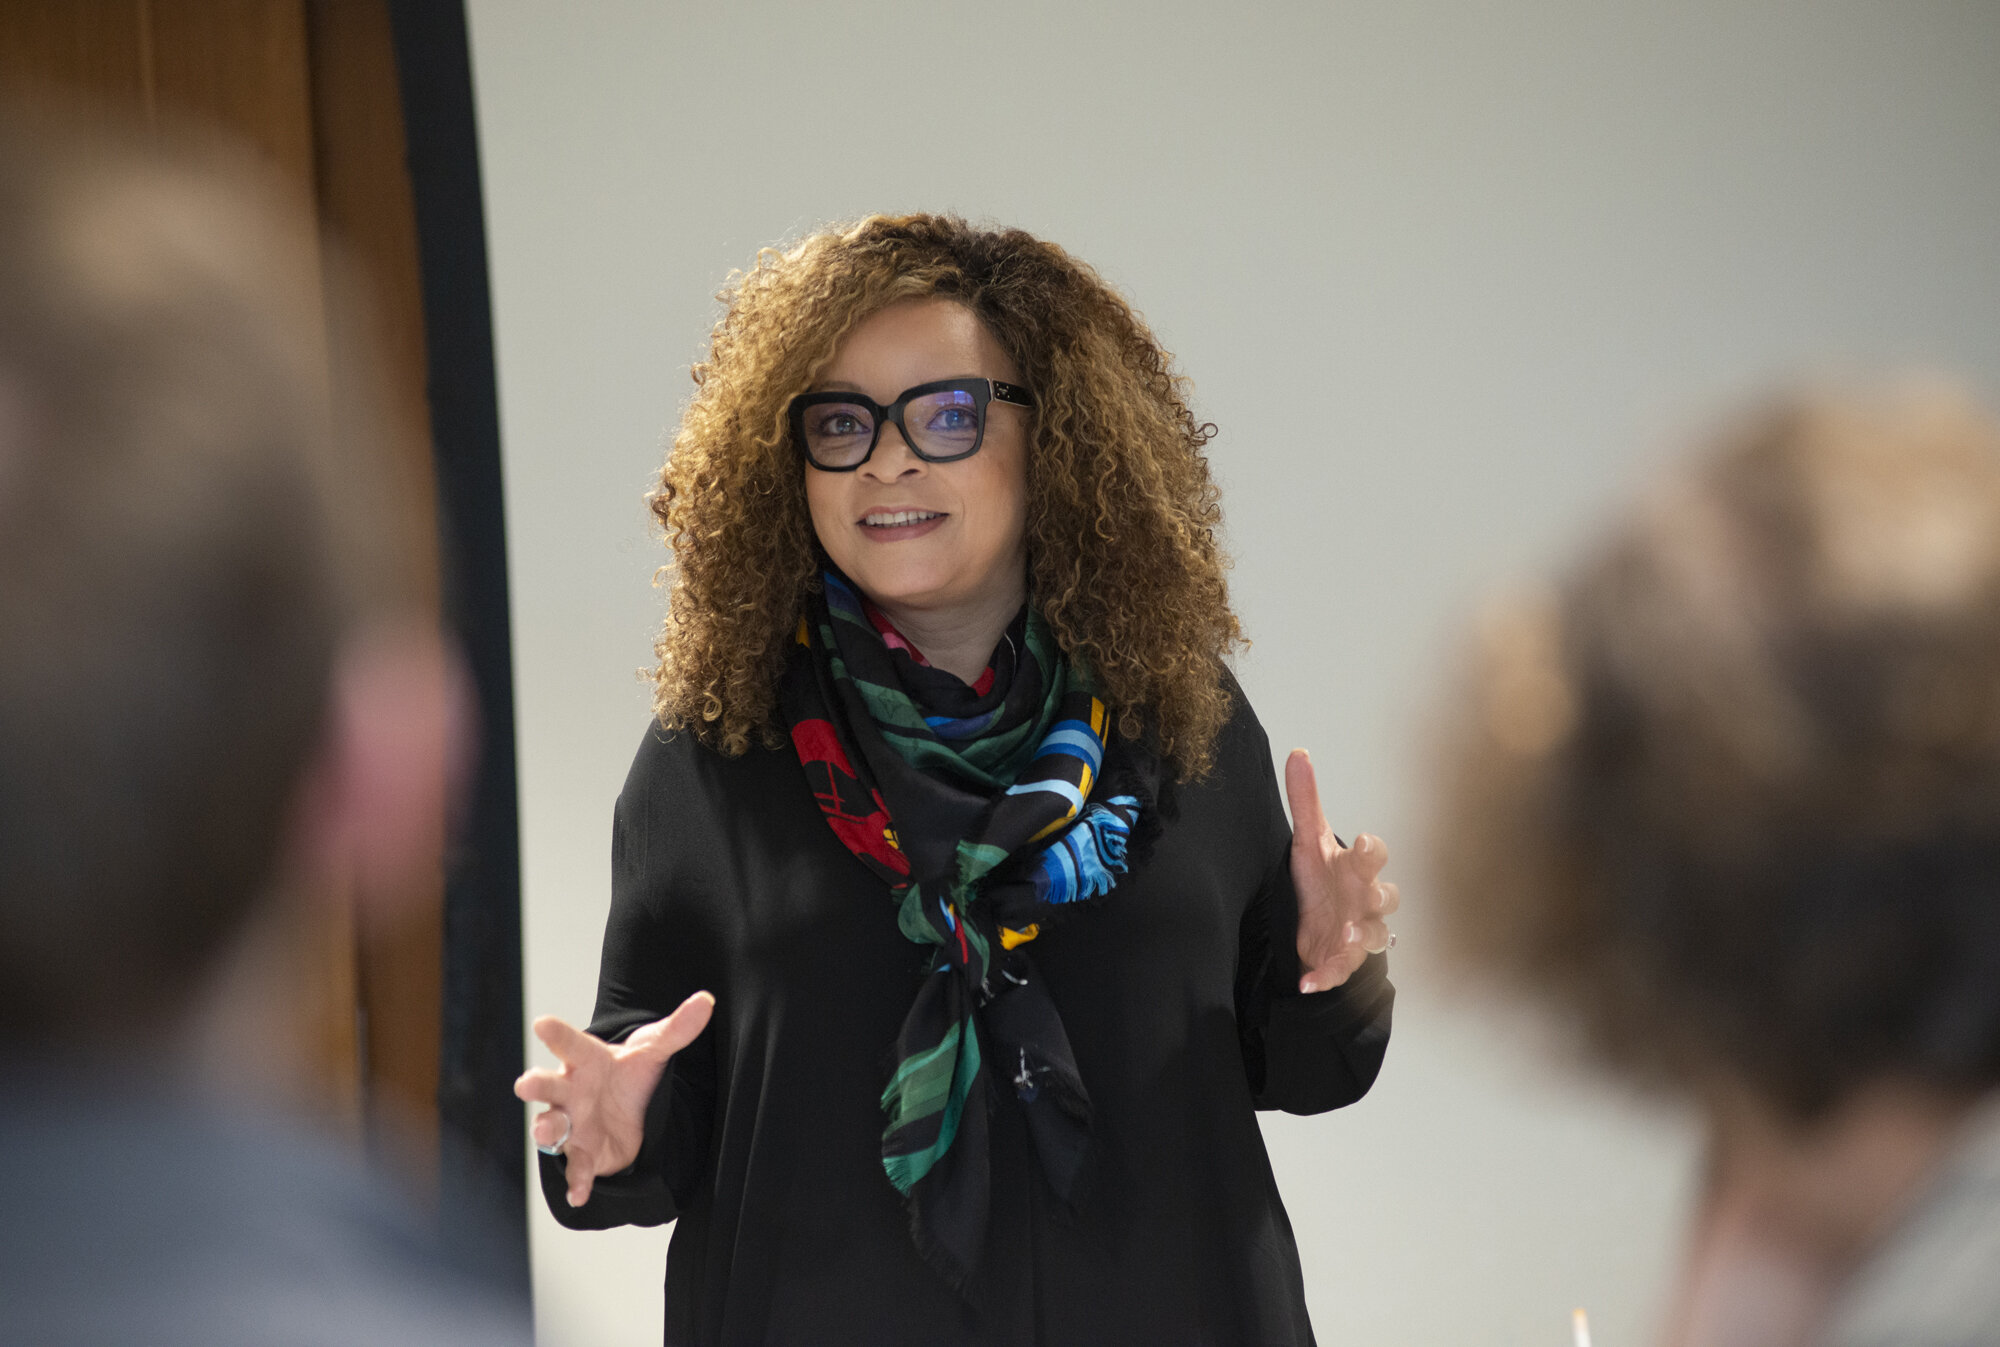  Academy Award-winning costume designer Ruth E Carter. Photo by David Andrews, property of The University of Maryland School of Theatre, Dance and Performance Studies, 2020. All Rights Reserved. 